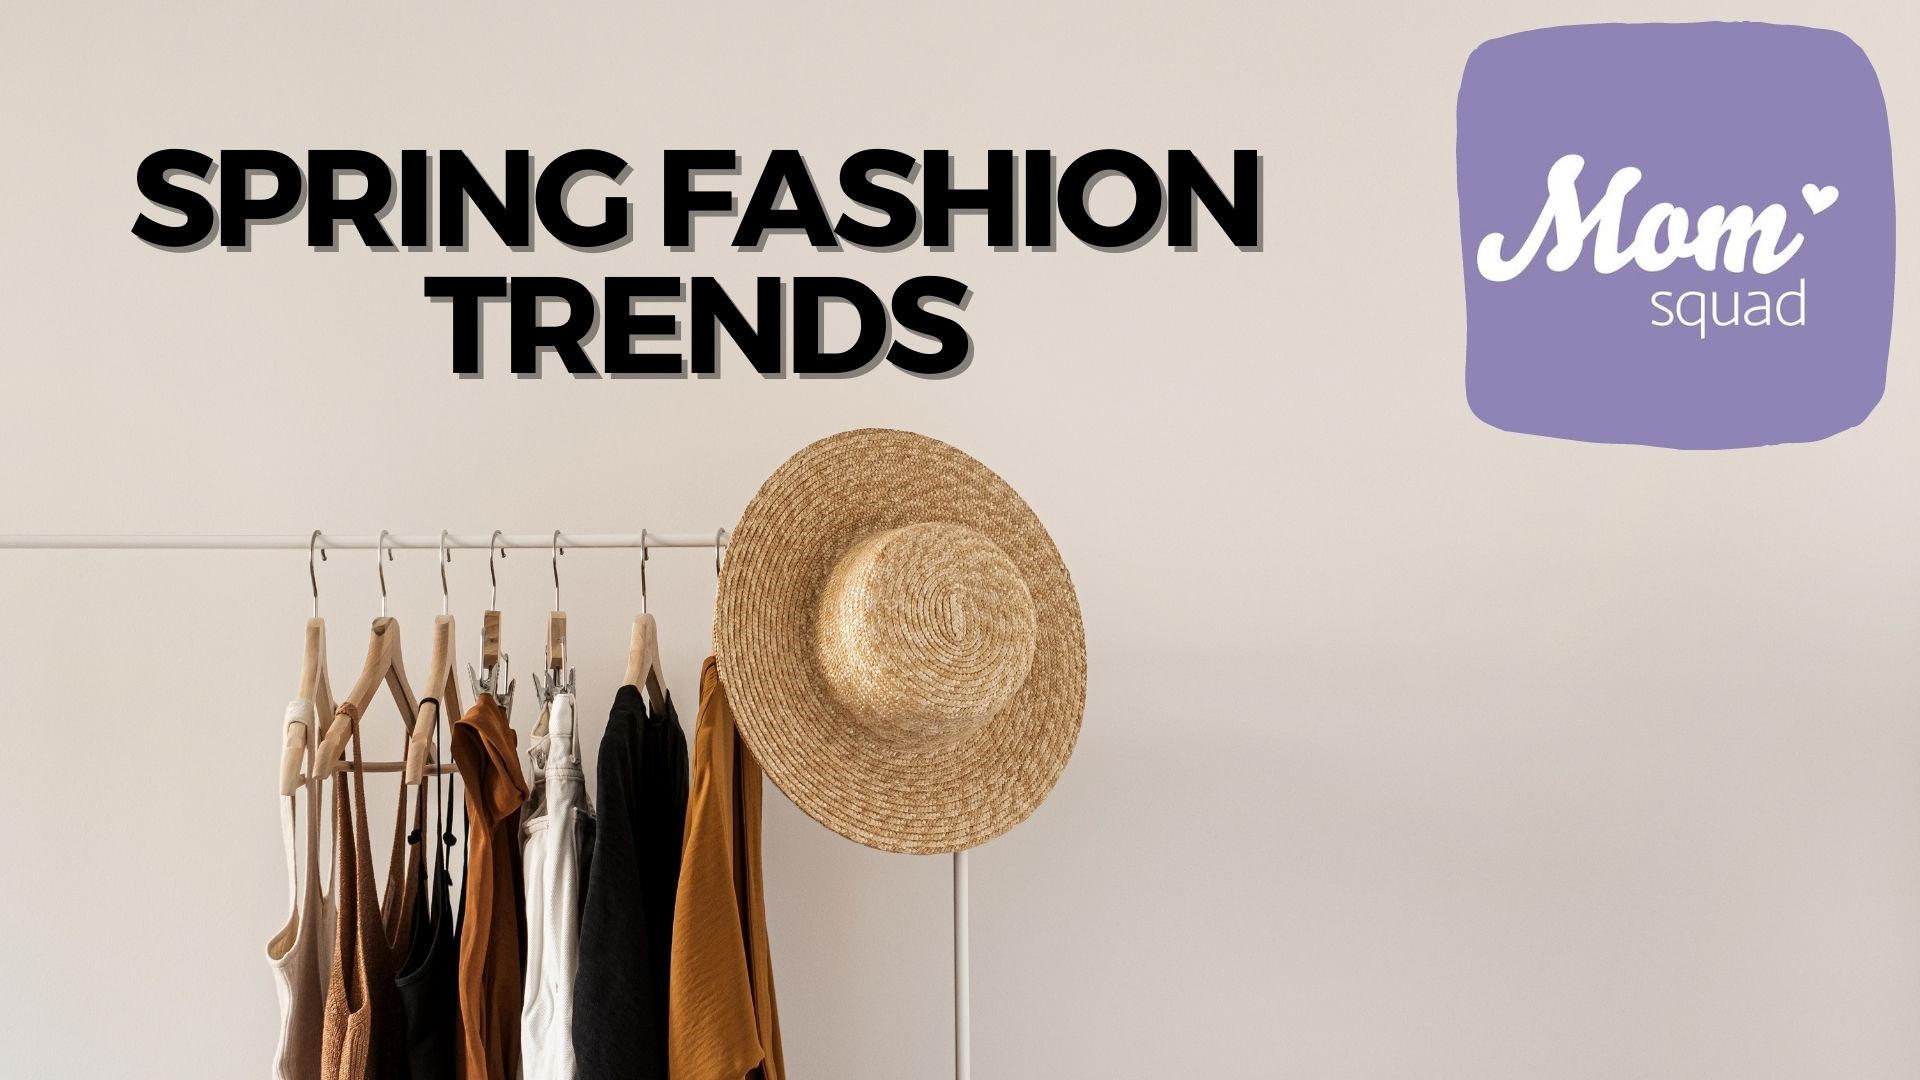 WKYC's Maureen Kyle sits down with fashion consultant Halie Abrams to discuss what is in and what is out of style for Spring 2023.